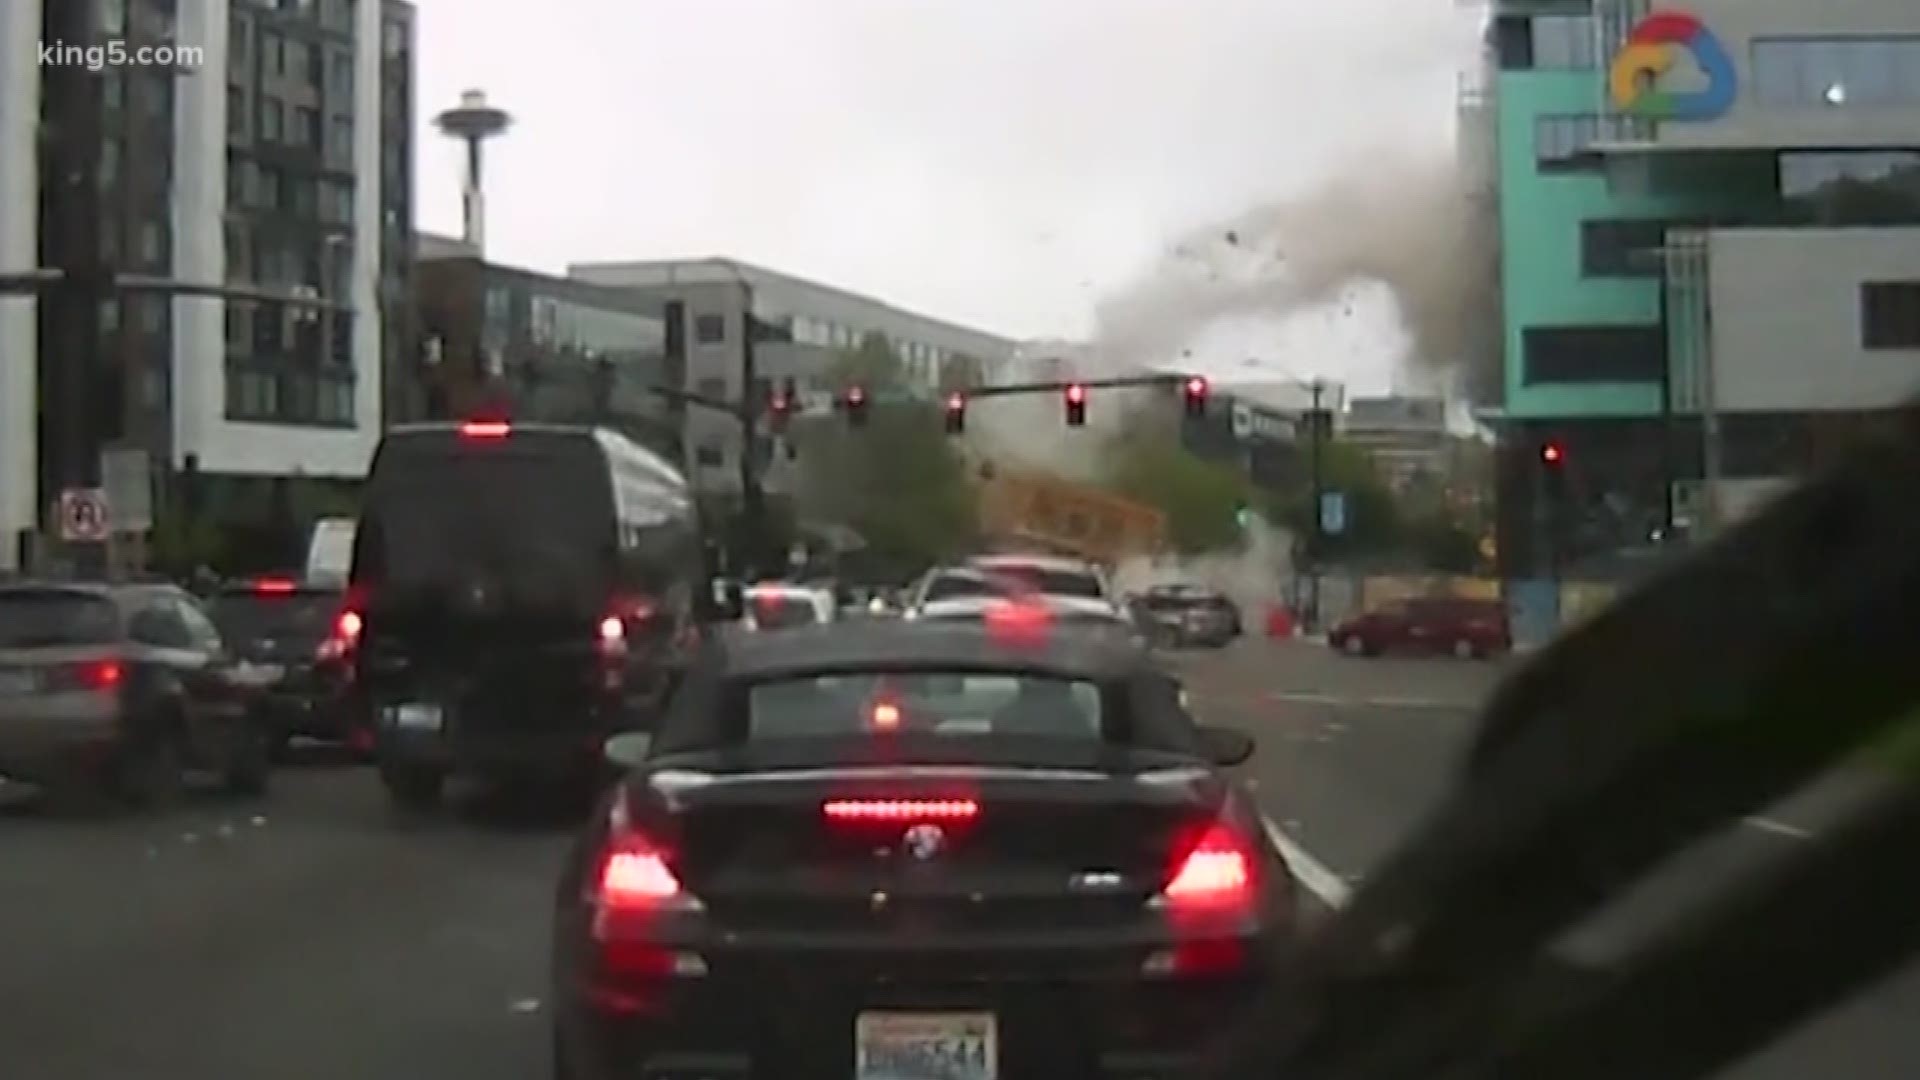 KING 5 obtained exclusive video showing the moment a crane collapsed in South Lake Union Saturday afternoon. Two iron workers and two drivers were killed, including a Seattle Pacific University student.